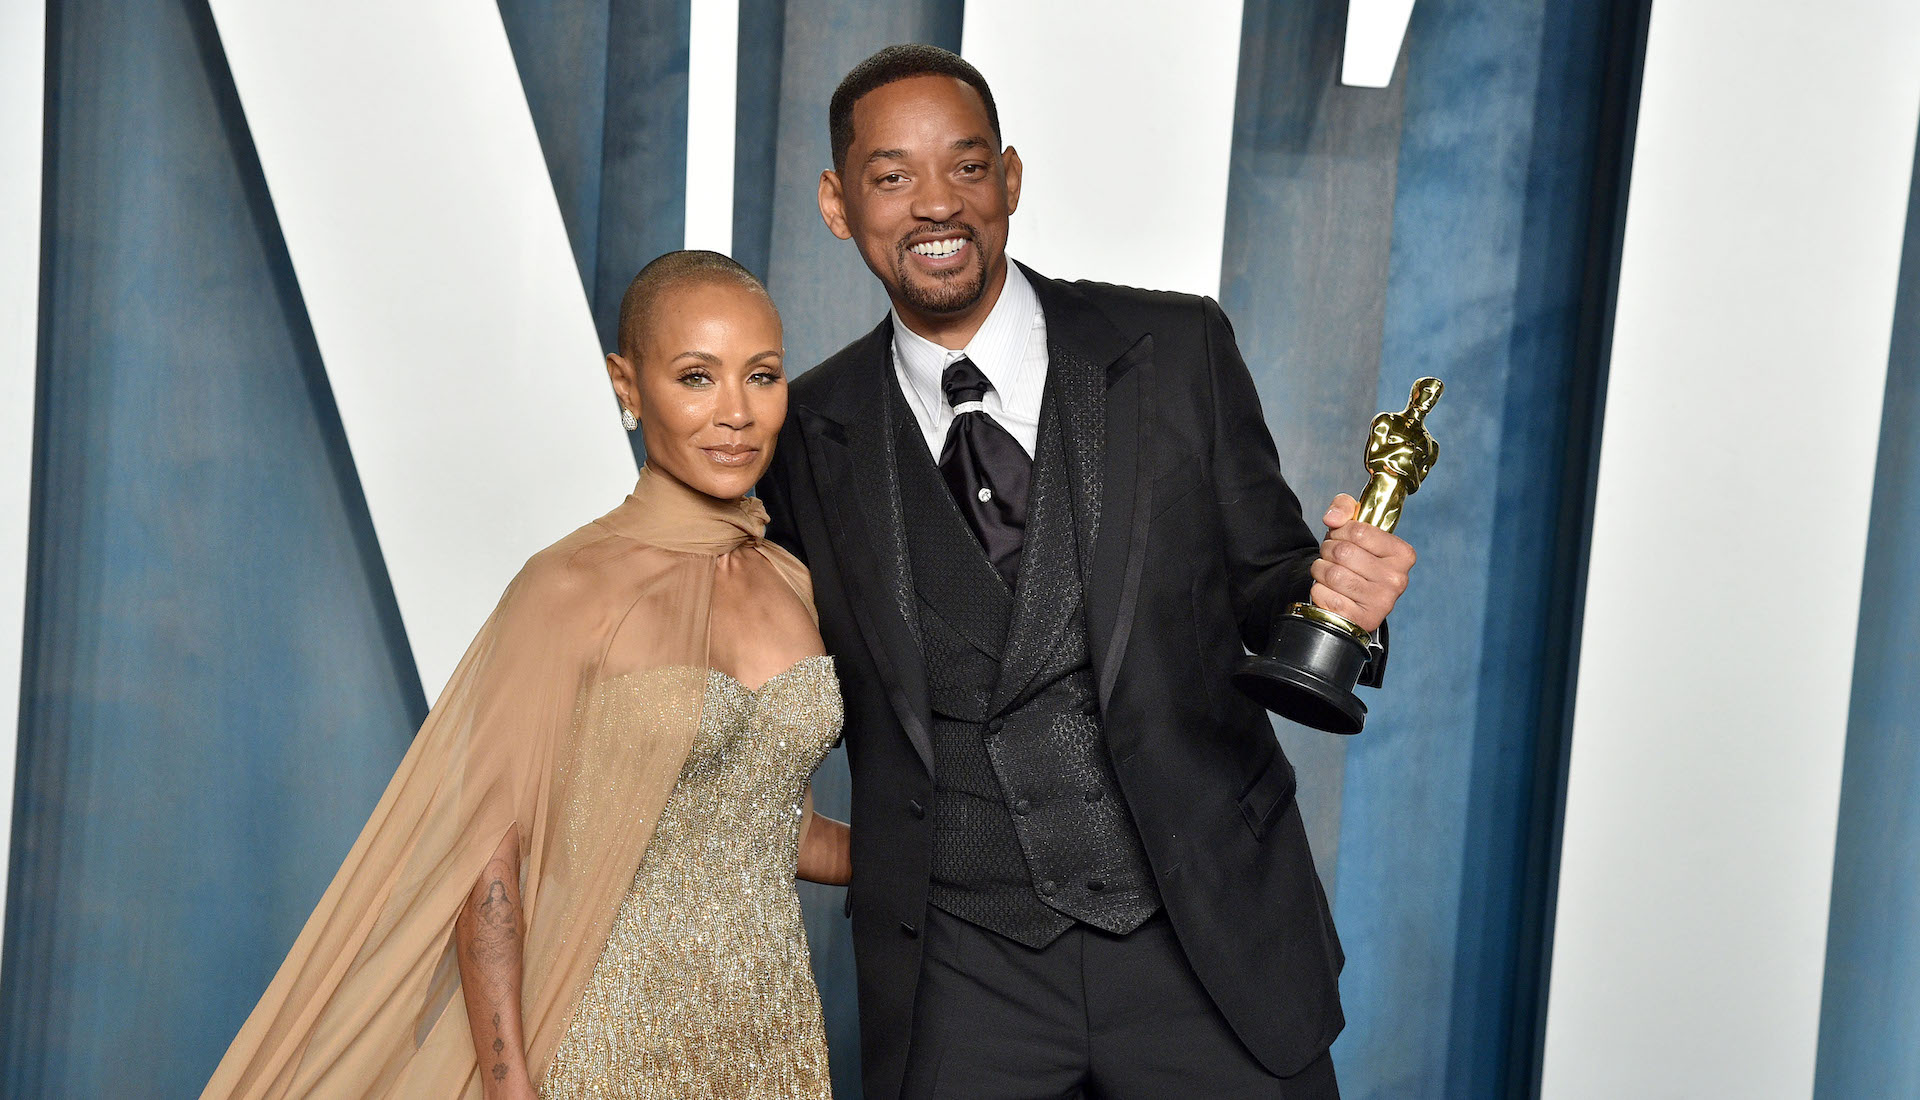 Will Smith and Jada Pinkett Smith Spotted Together for First Time Since Oscars Slap